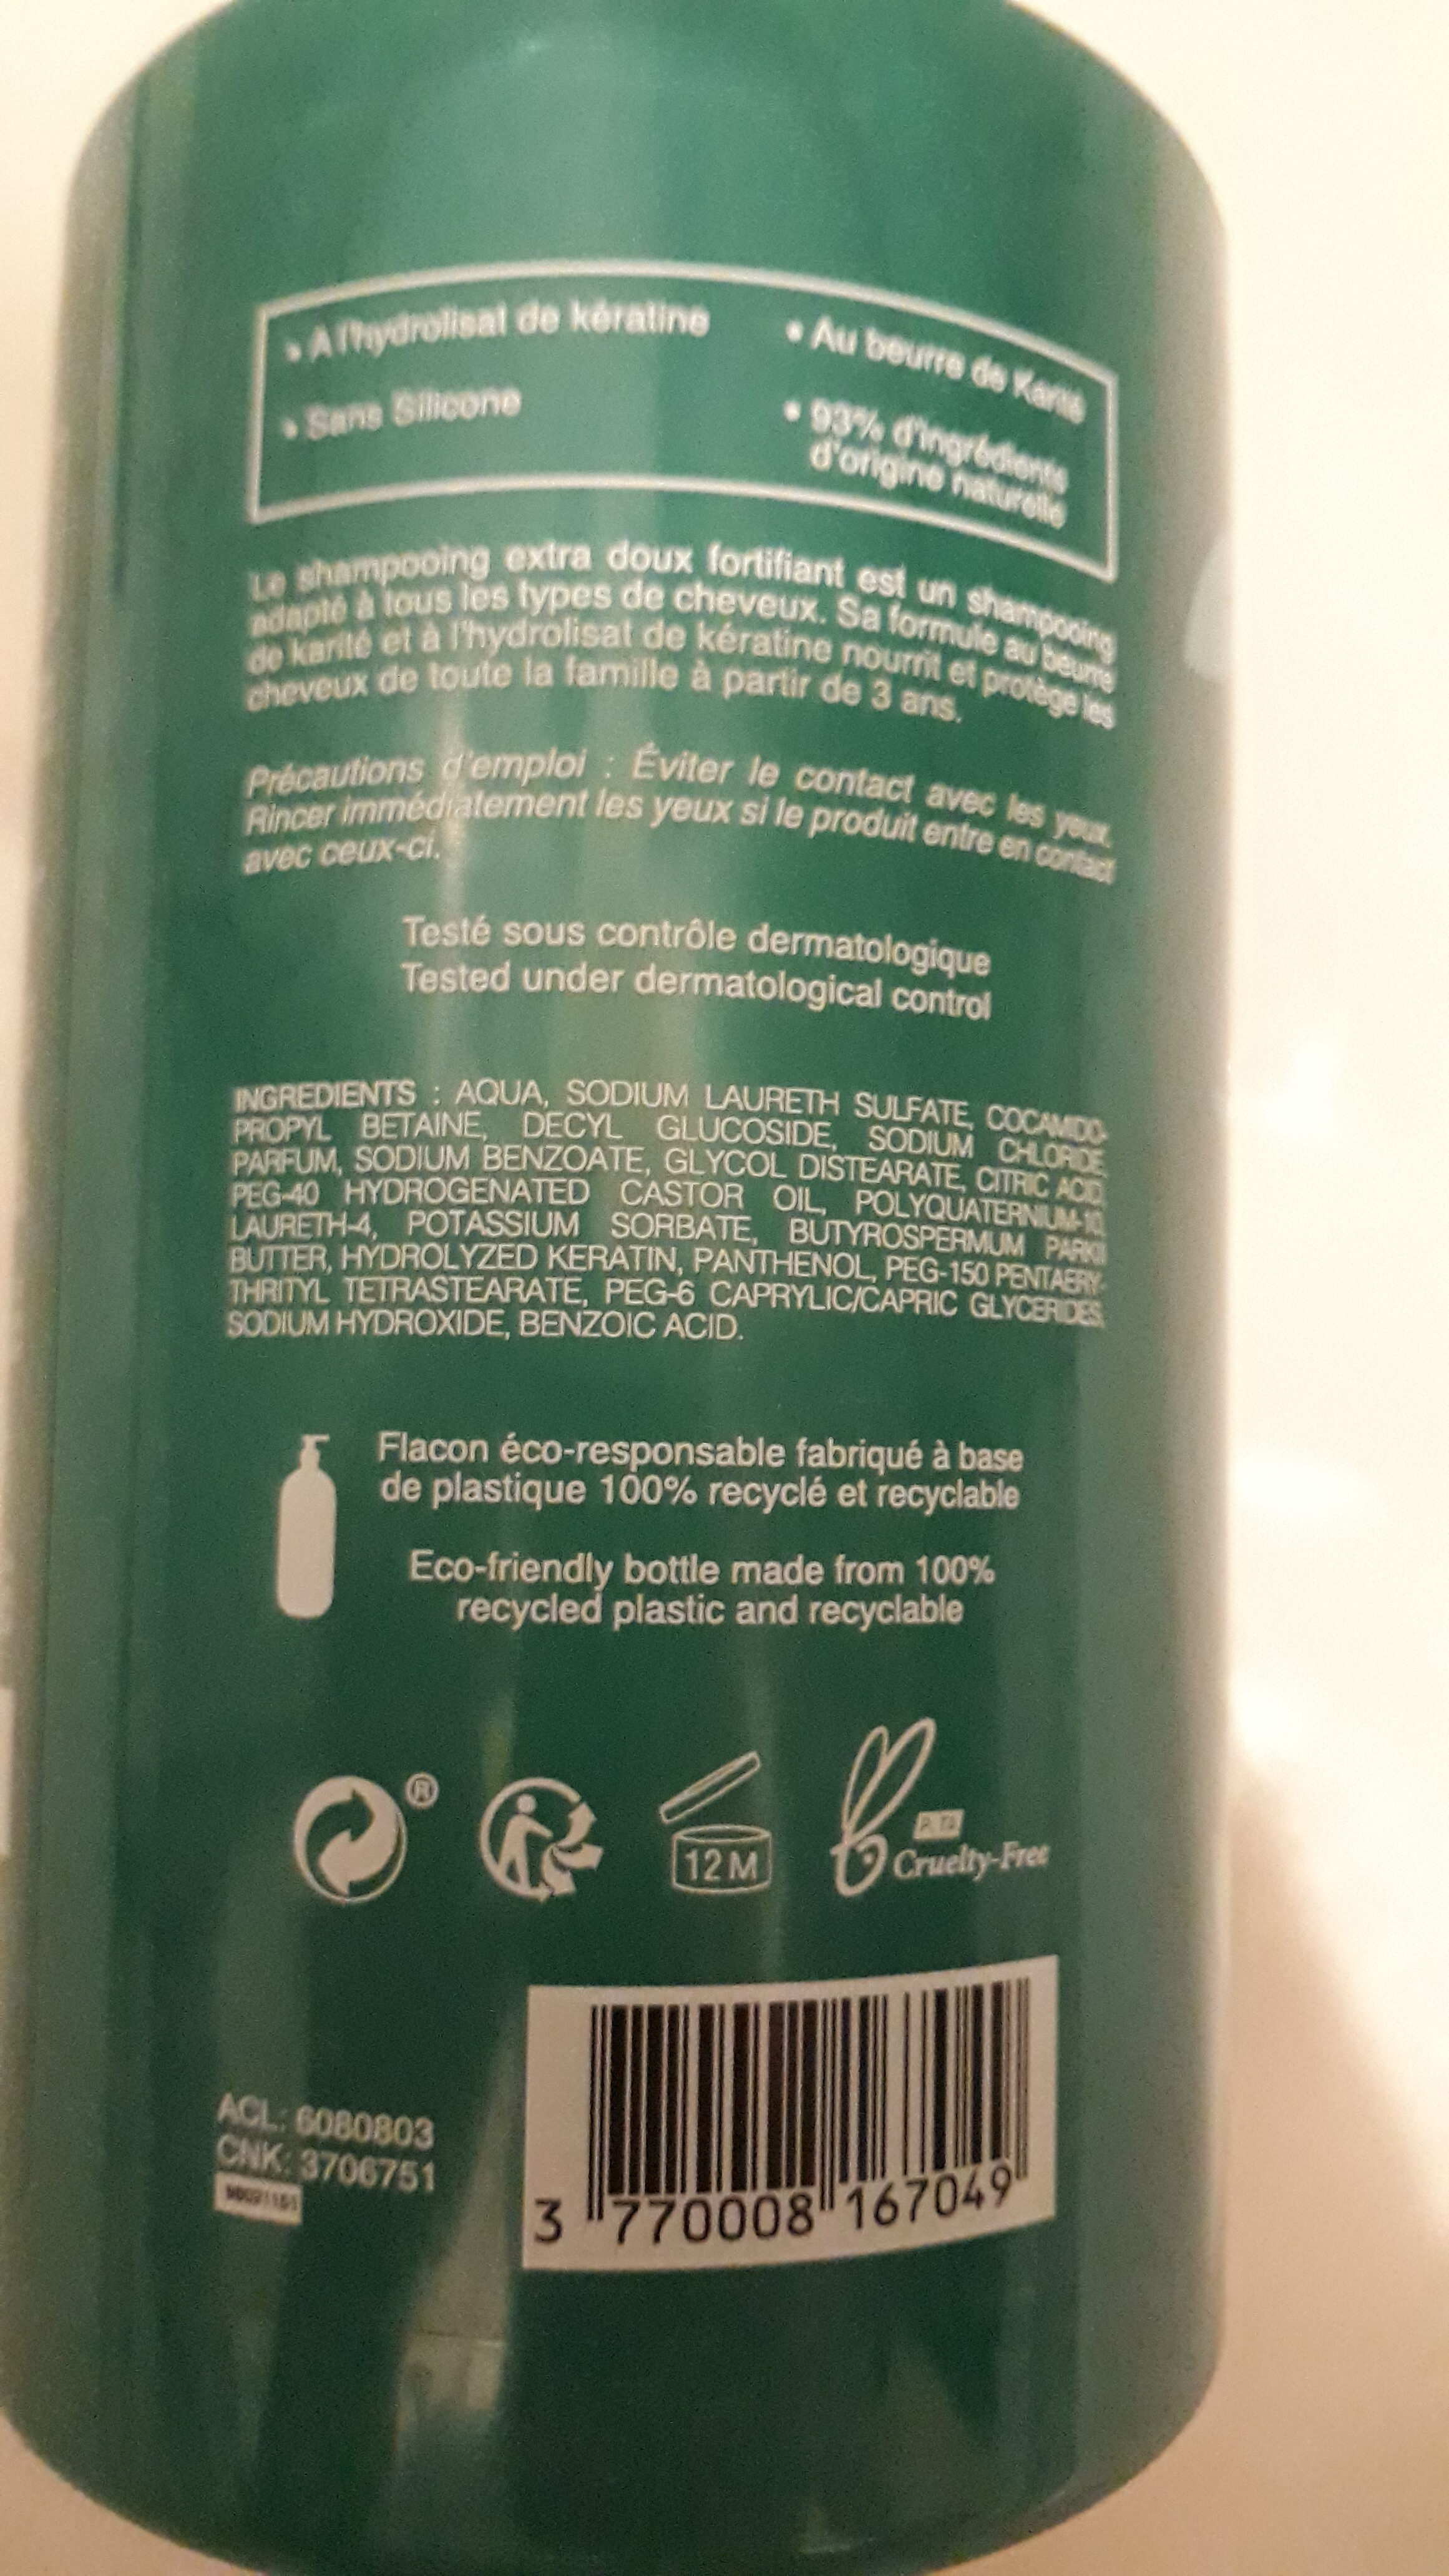 Shampoing extra doux - Ingredients - fr